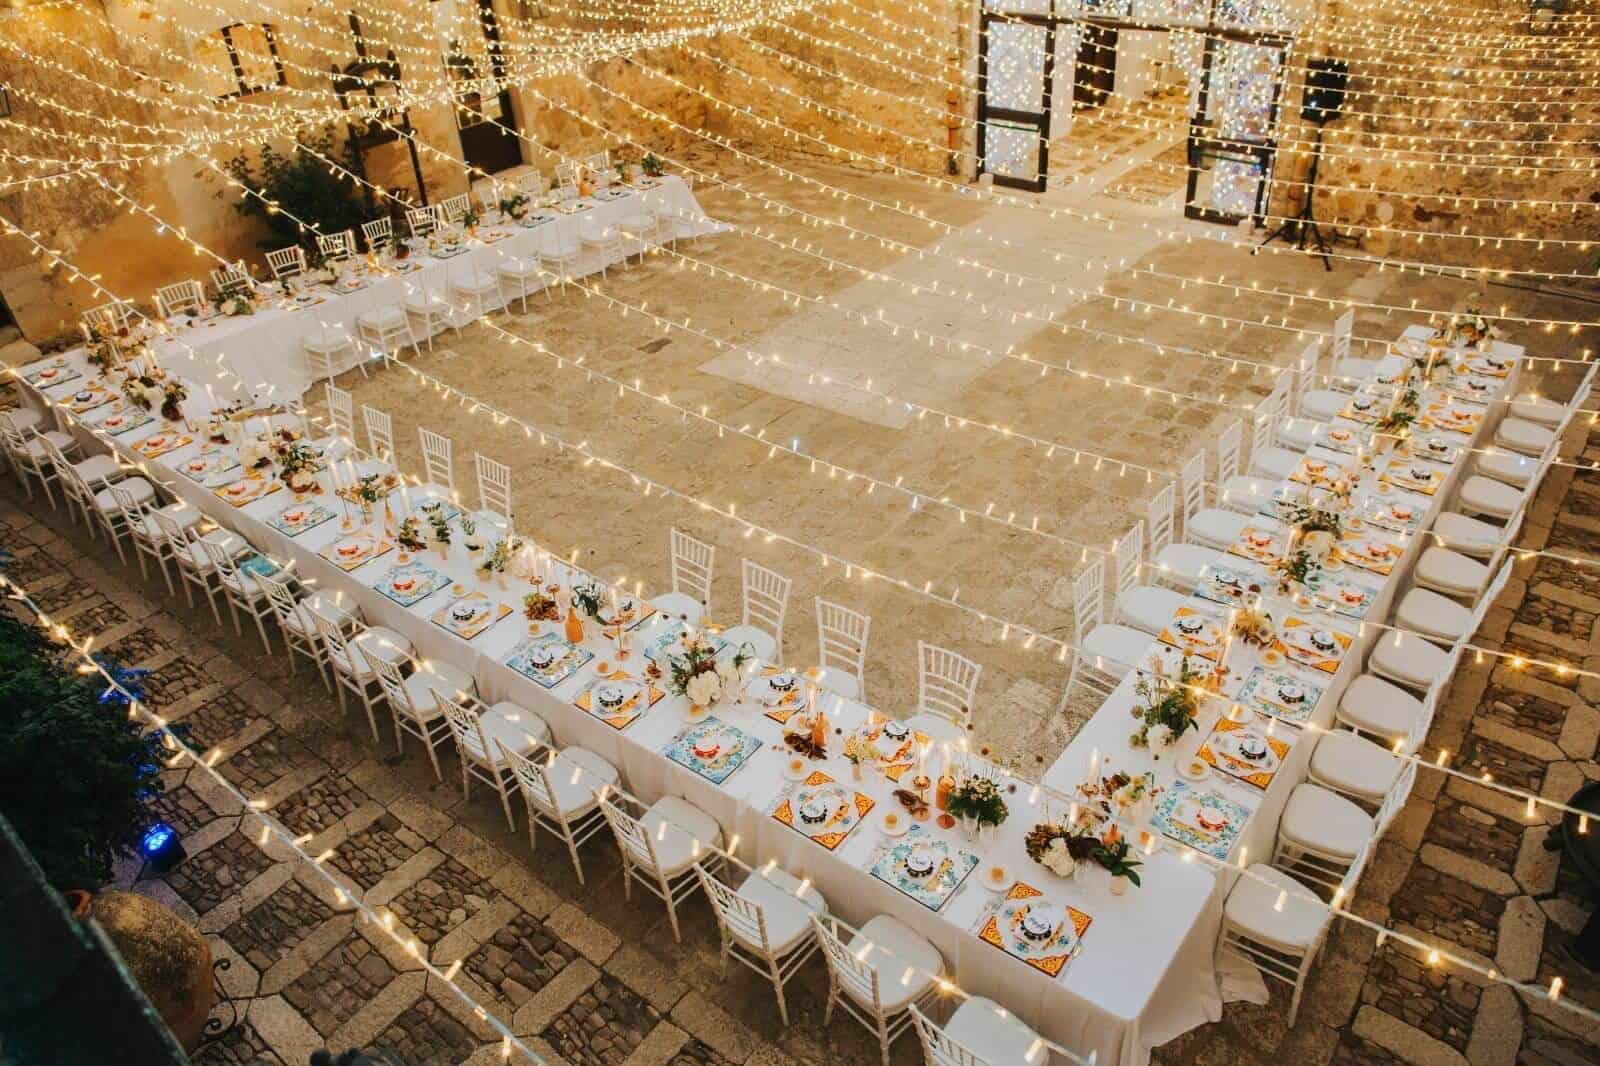 Sicilian Wedding Table Decored in Sumptuously and richly illuminated way